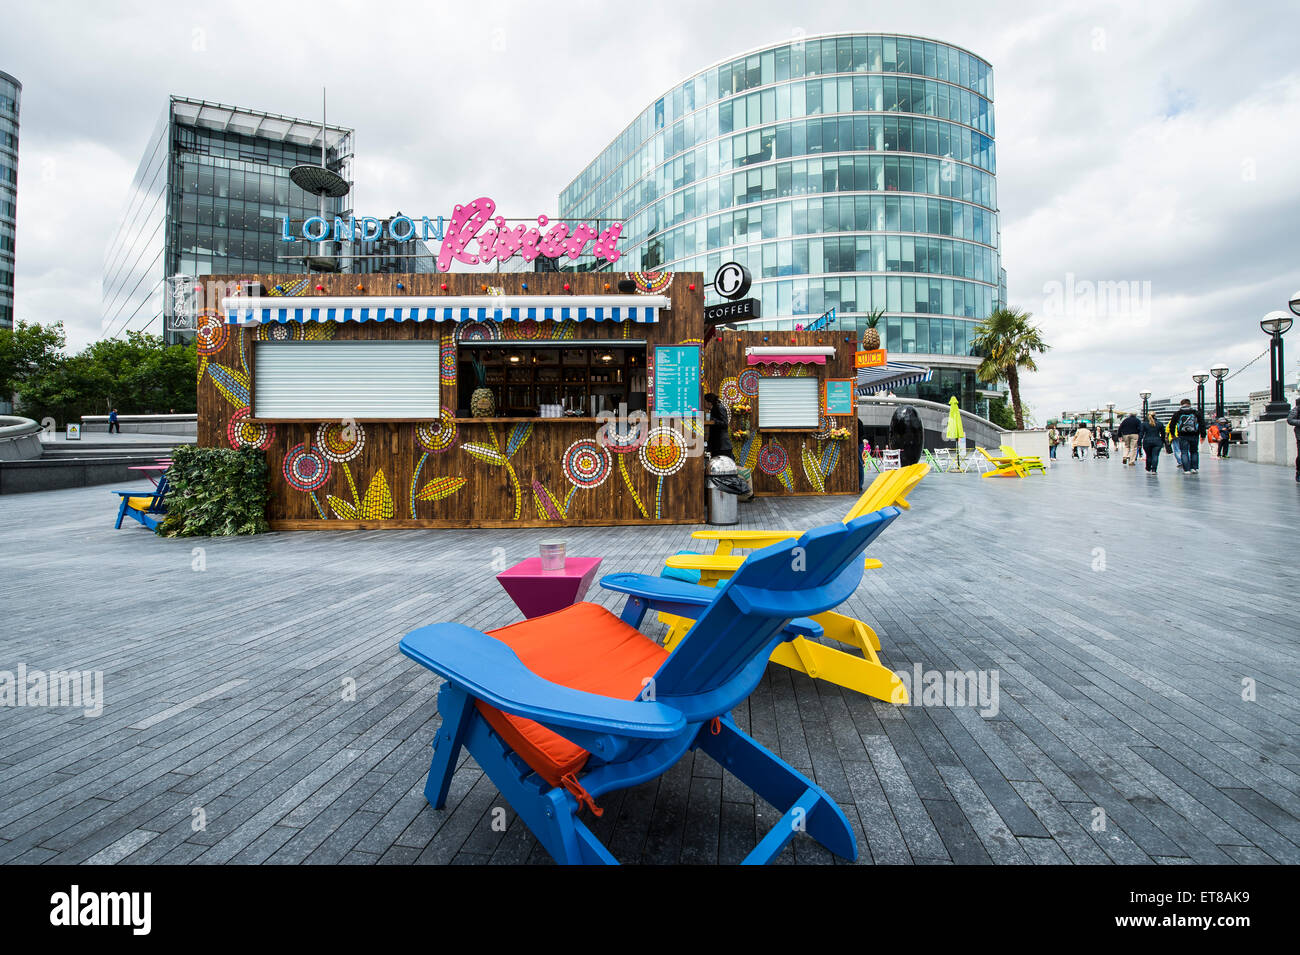 London Riviera pop up cafe at More London next to City Hall on the River  Thames Embankment Stock Photo - Alamy